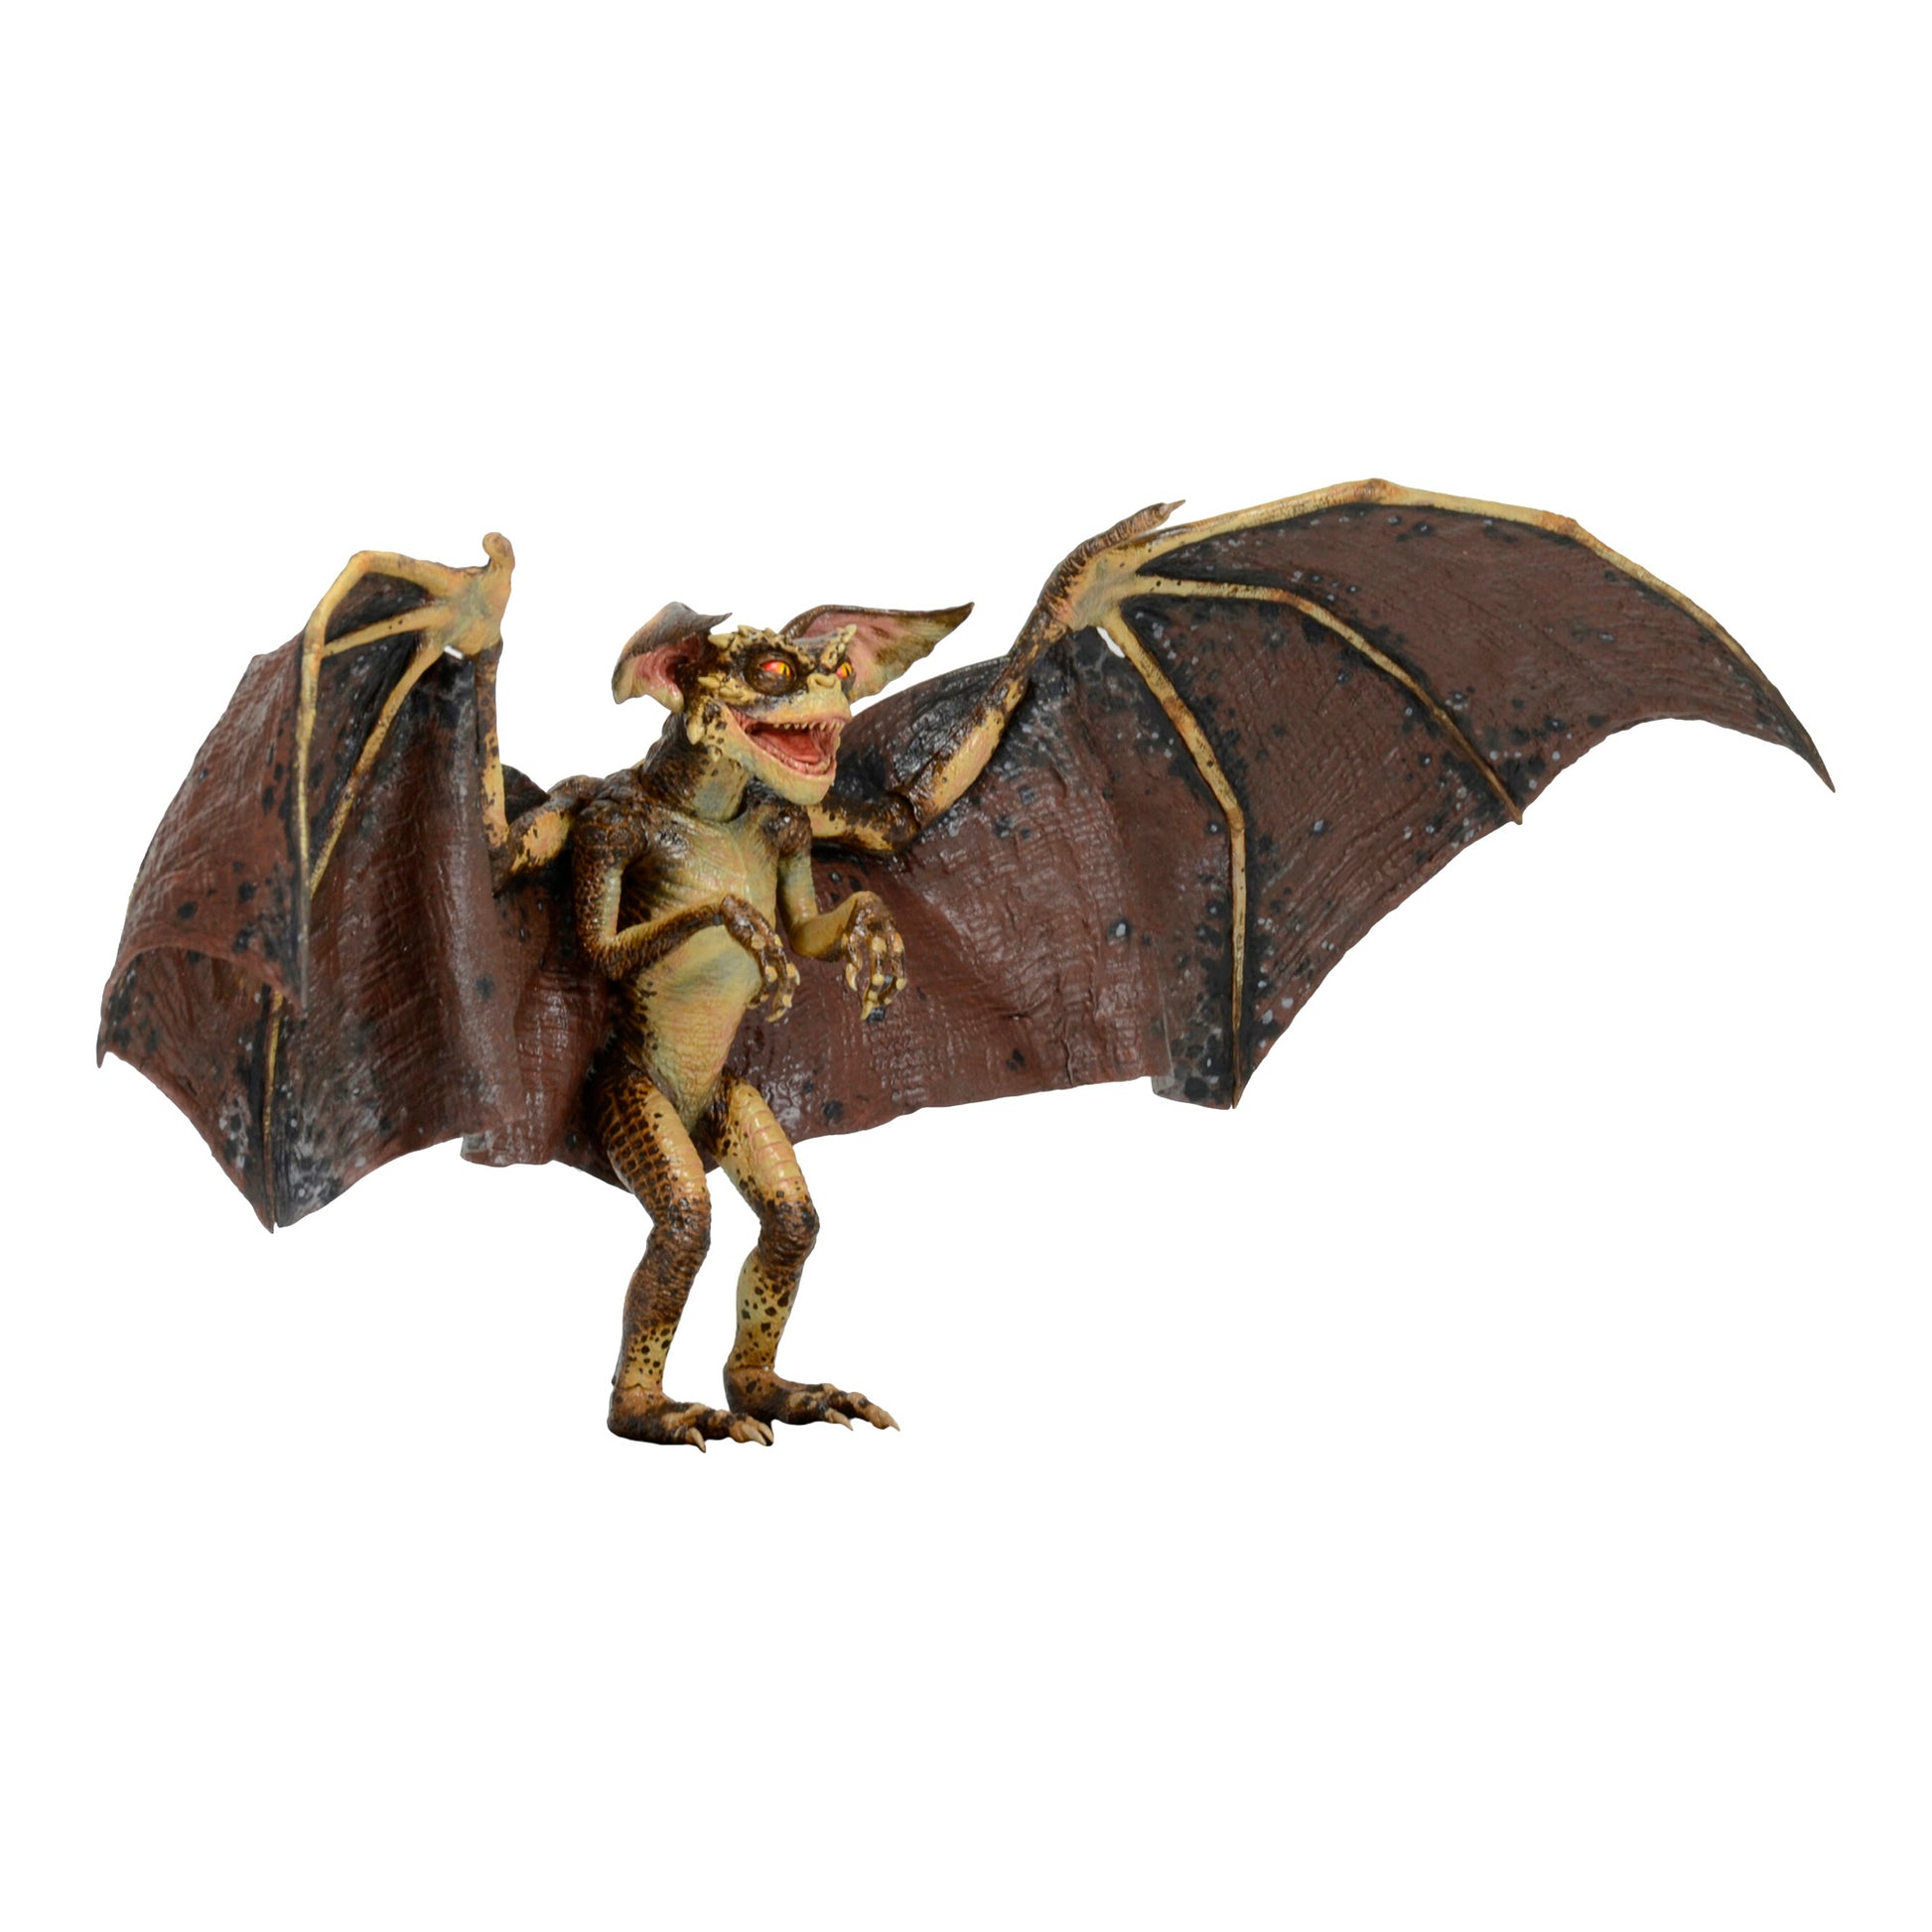 NECA: Gremlins 2 - The New Batch Deluxe Bat Gremlin 7 Tall Action